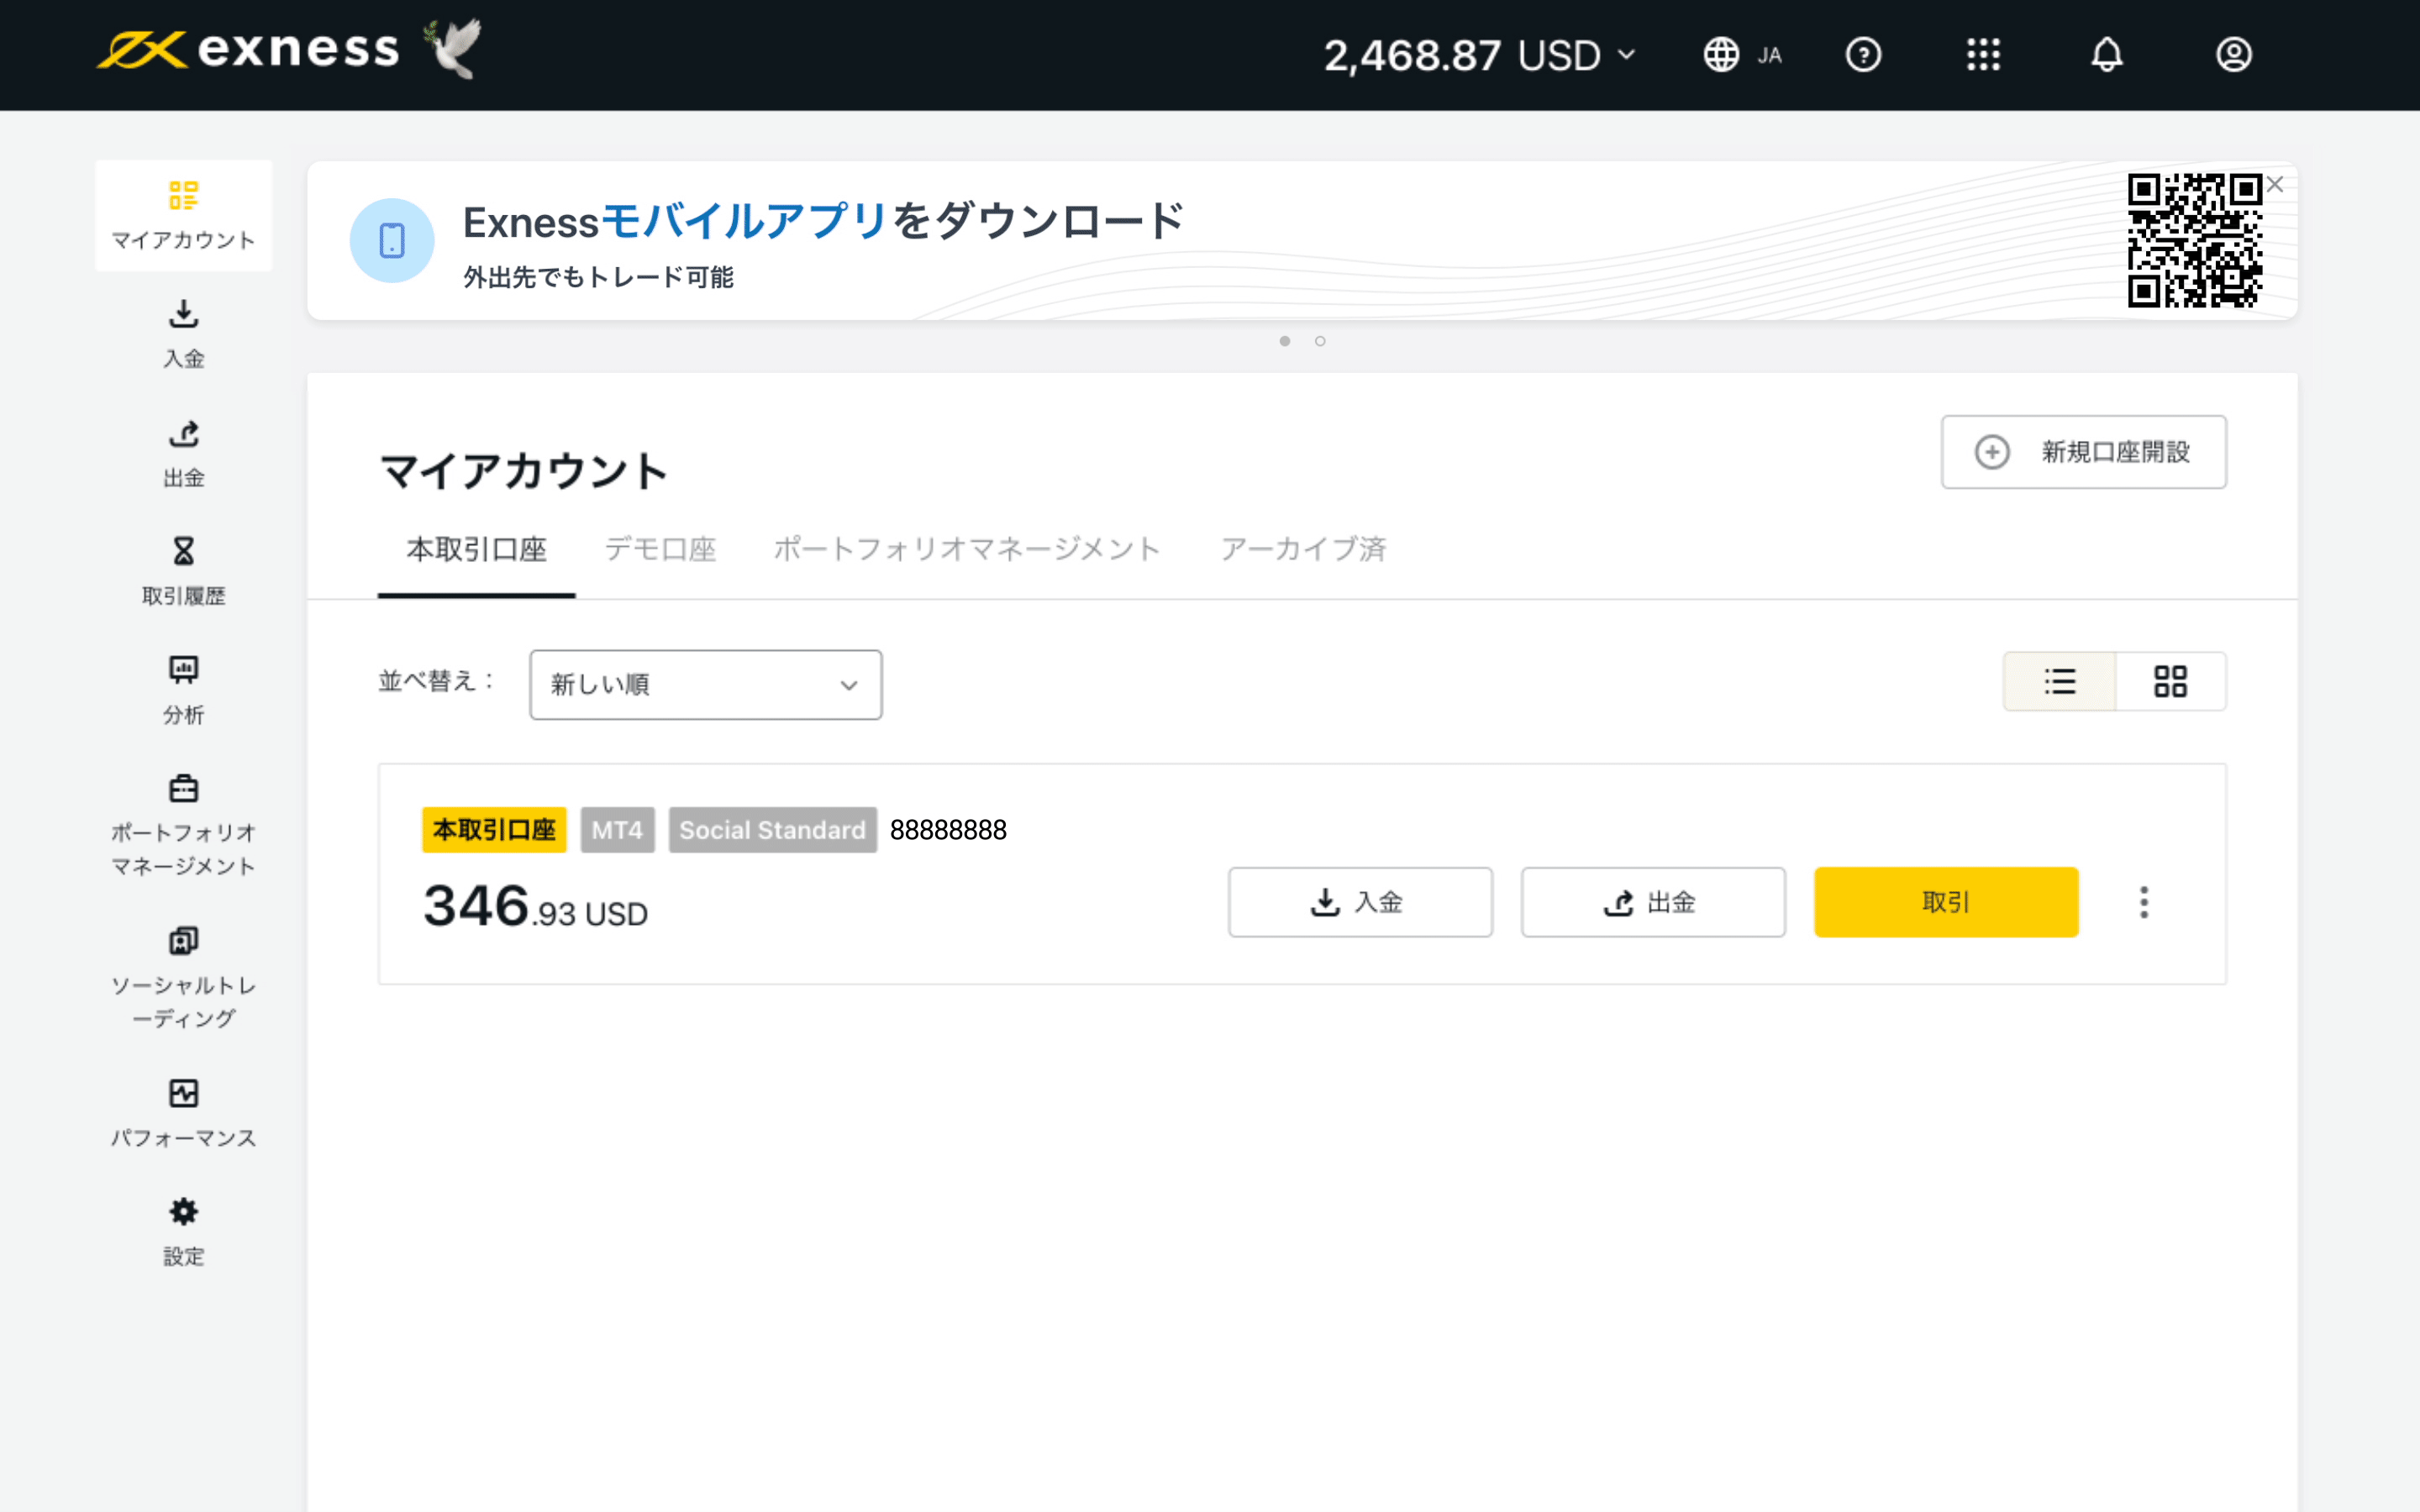 CSVP_7053_GIF How do I deposit and withdraw with Sticpay_ - Withdraw with Sticpay_JP (1).gif